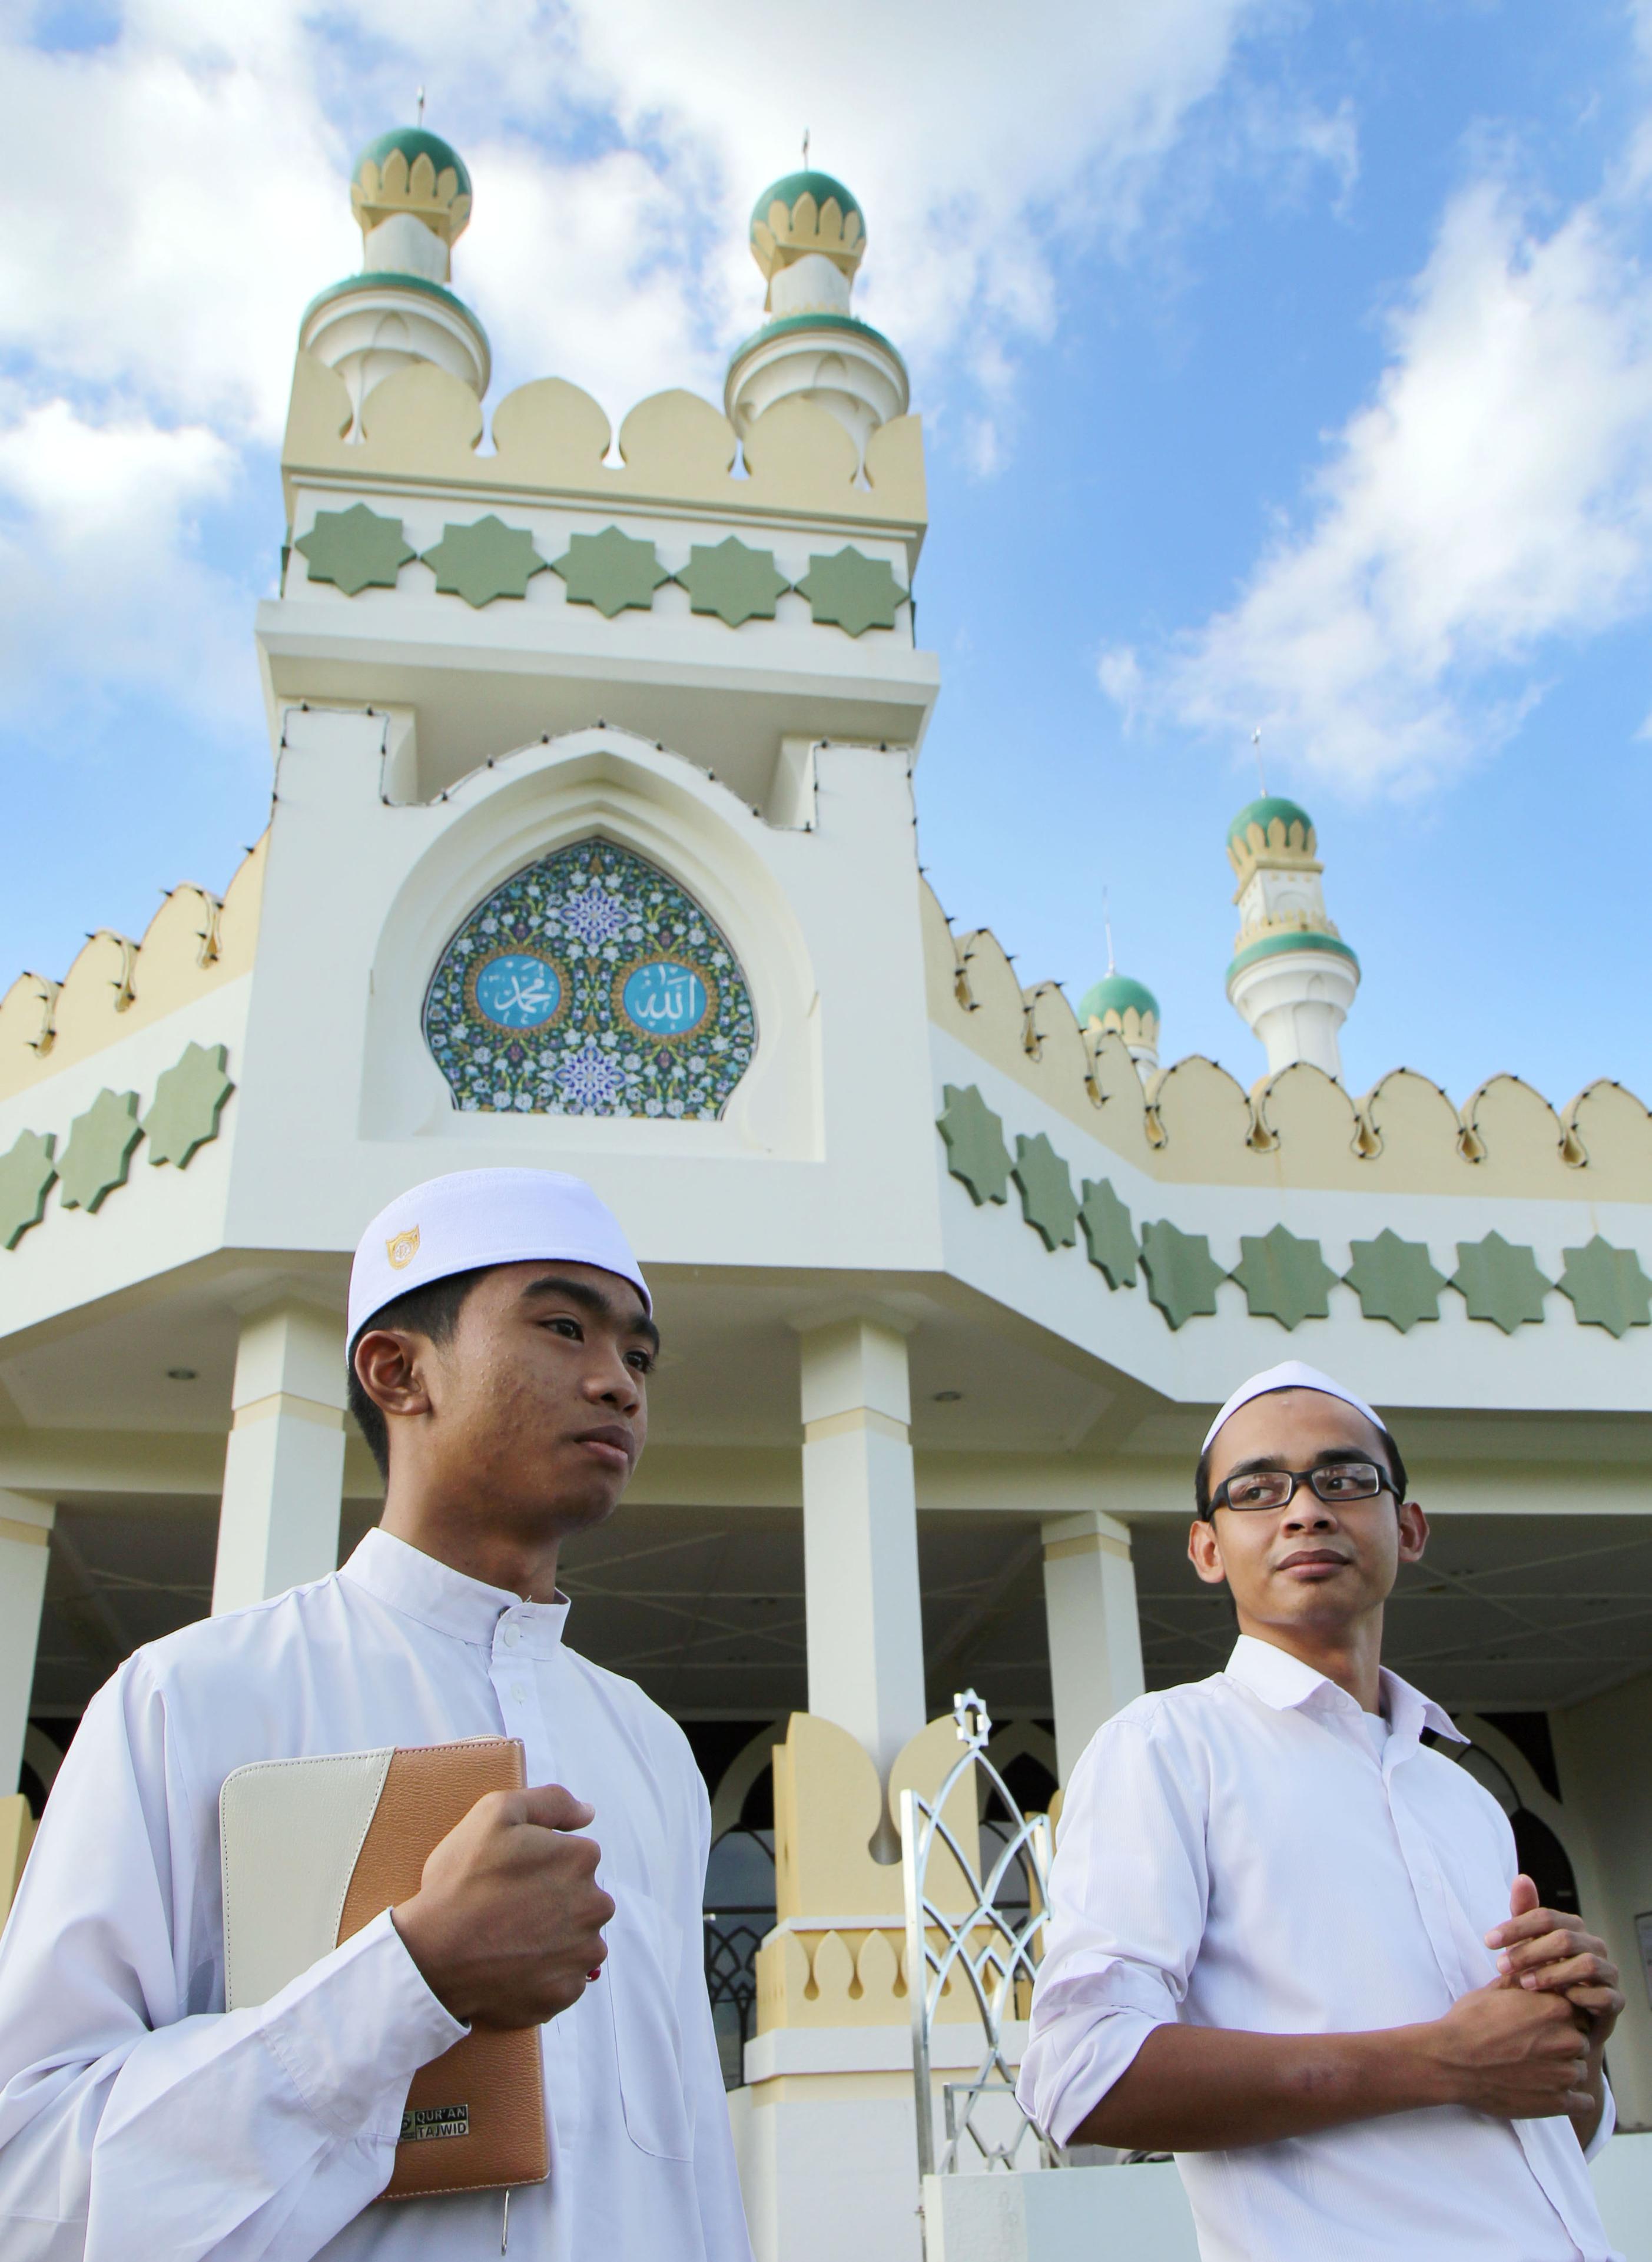 Young Muslims visit a mosque in Bandar Seri Begawan, the capital of Brunei, on May 1, 2014 (Kyodo)